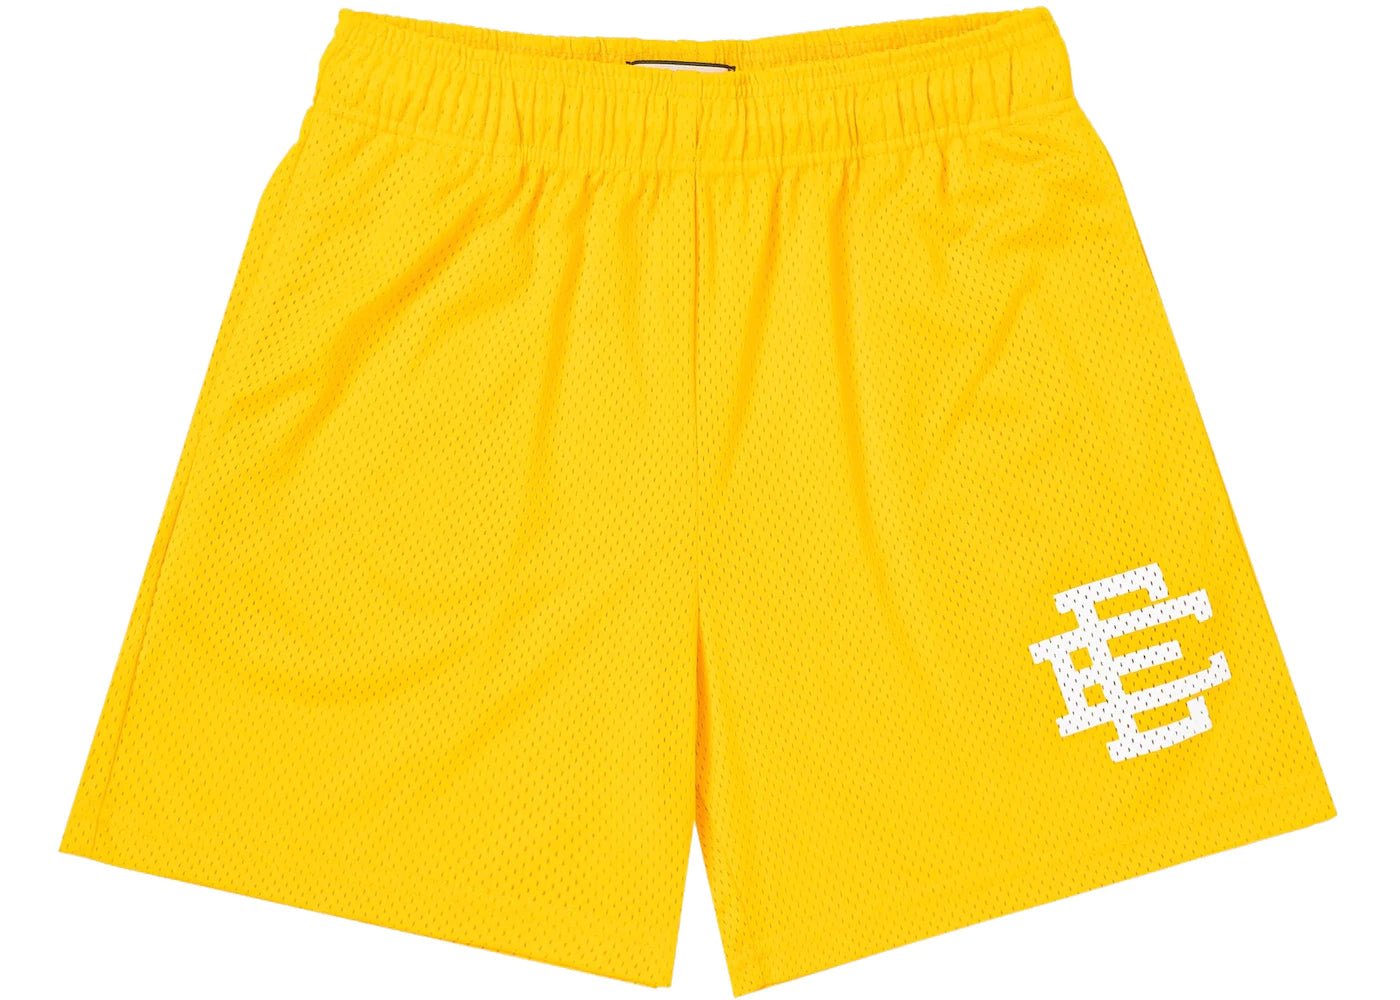 Eric Emanuel EE Shorts - Yellow - Shorts - Jawns on Fire Sneakers & Streetwear